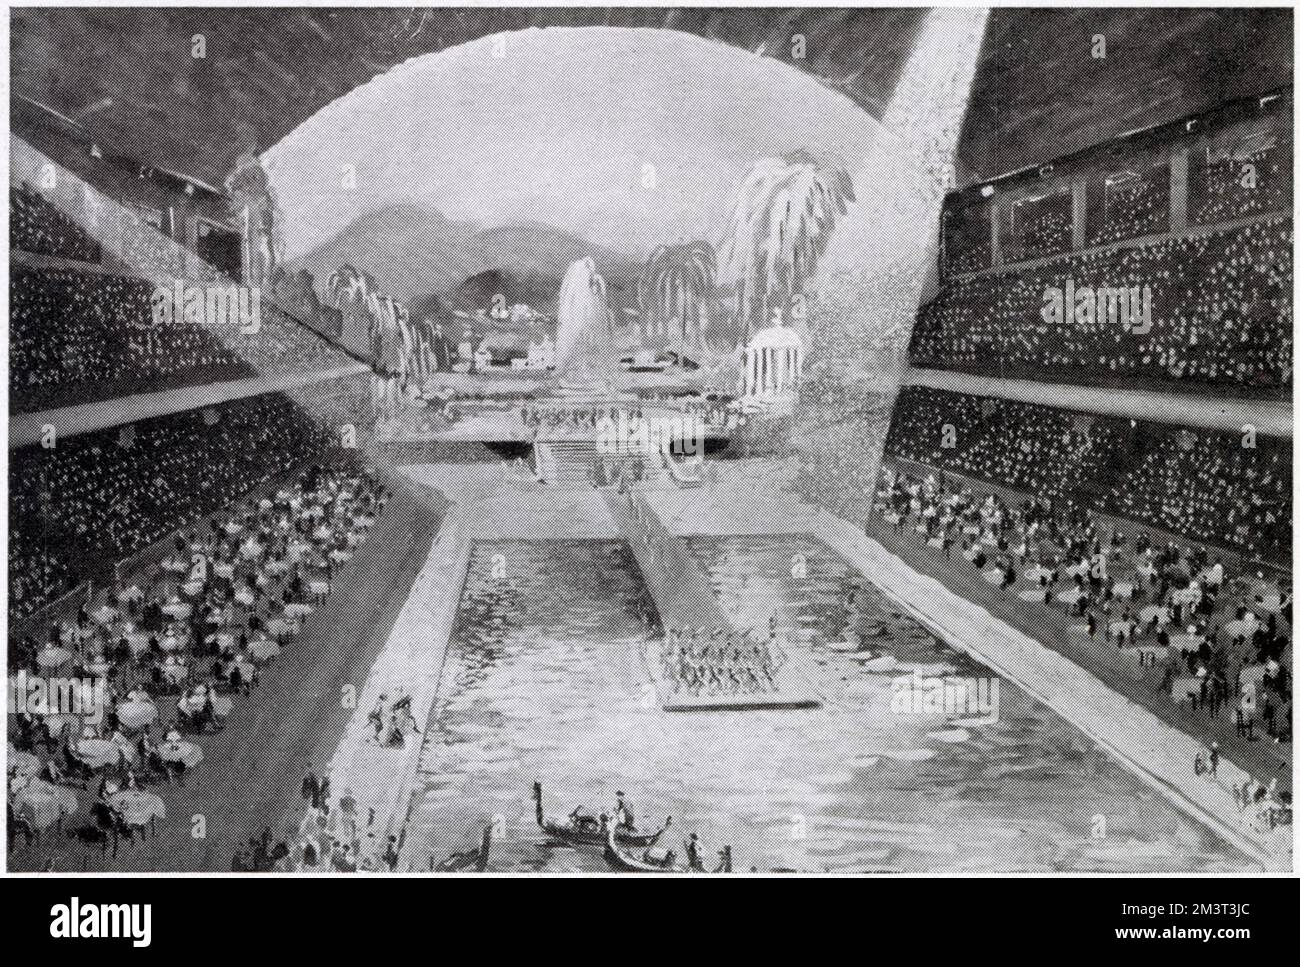 Artist's impression of Earl's Court with a lido pool made possible by lowering the foor. Stock Photo